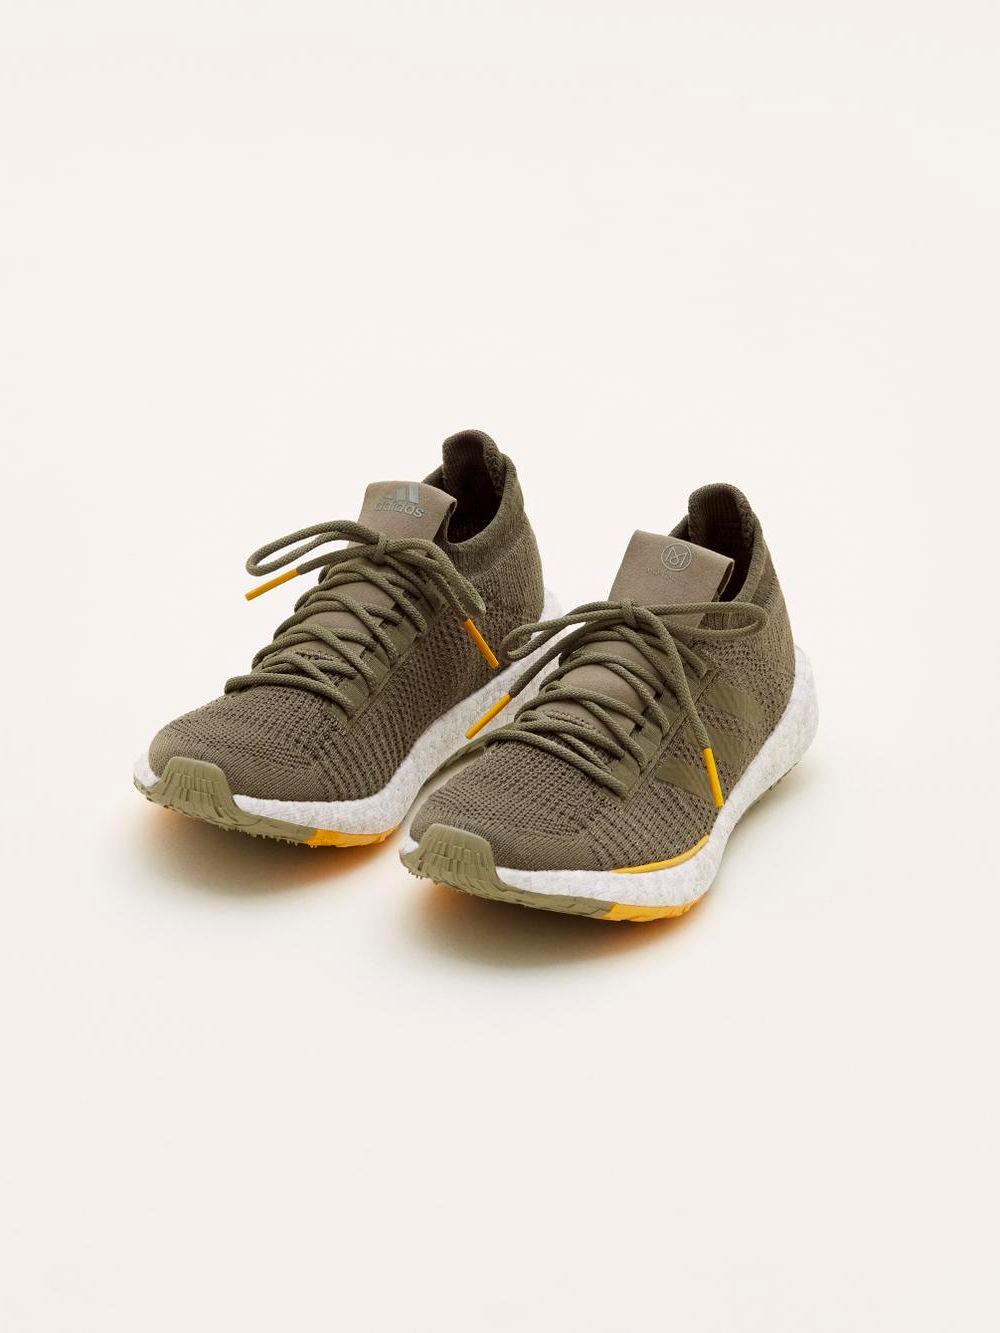 Adidas x Monocle | Collaborations | The 